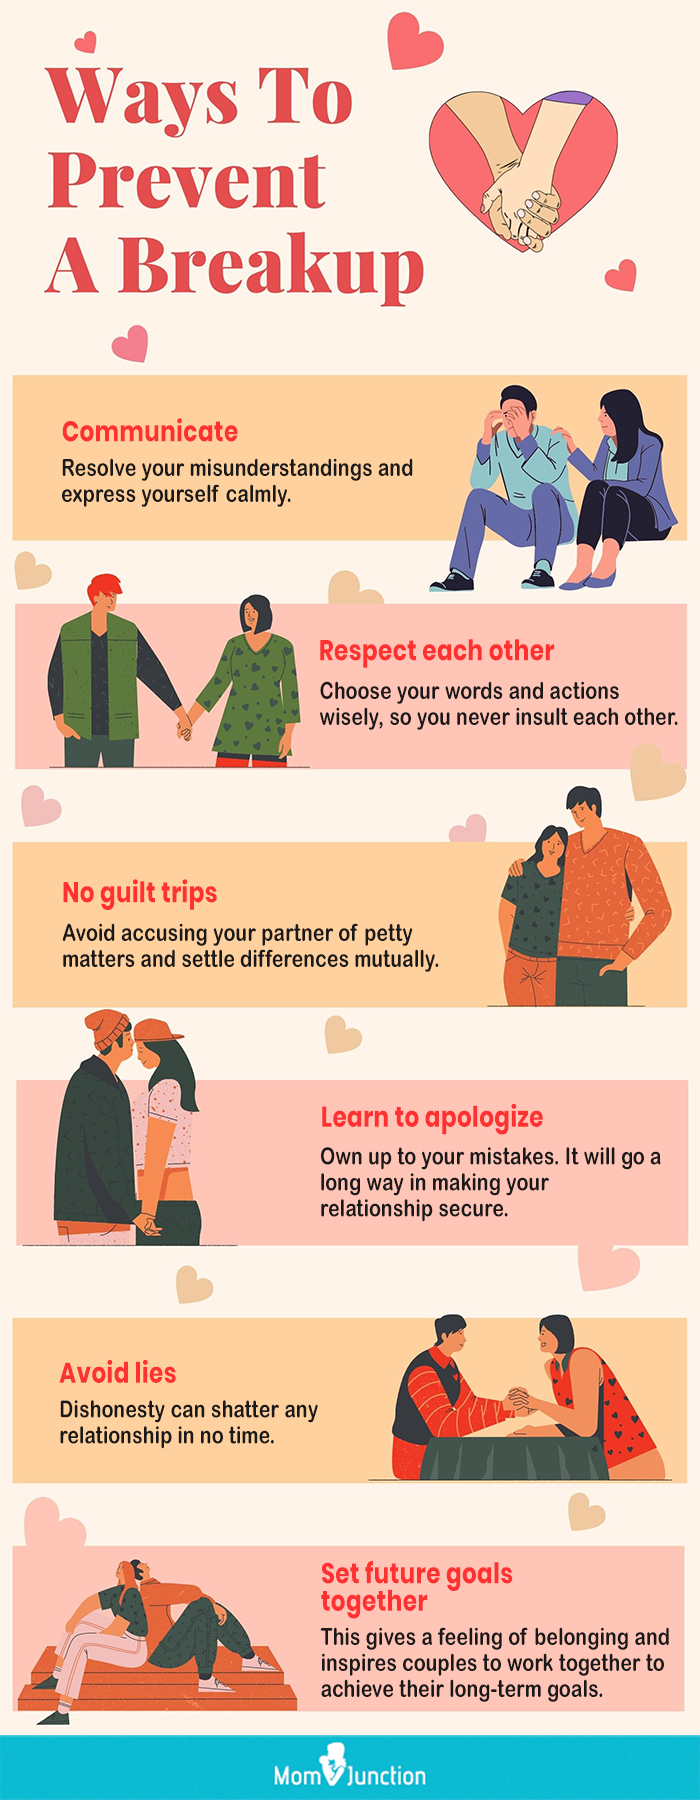 ways to prevent a breakup [infographic]